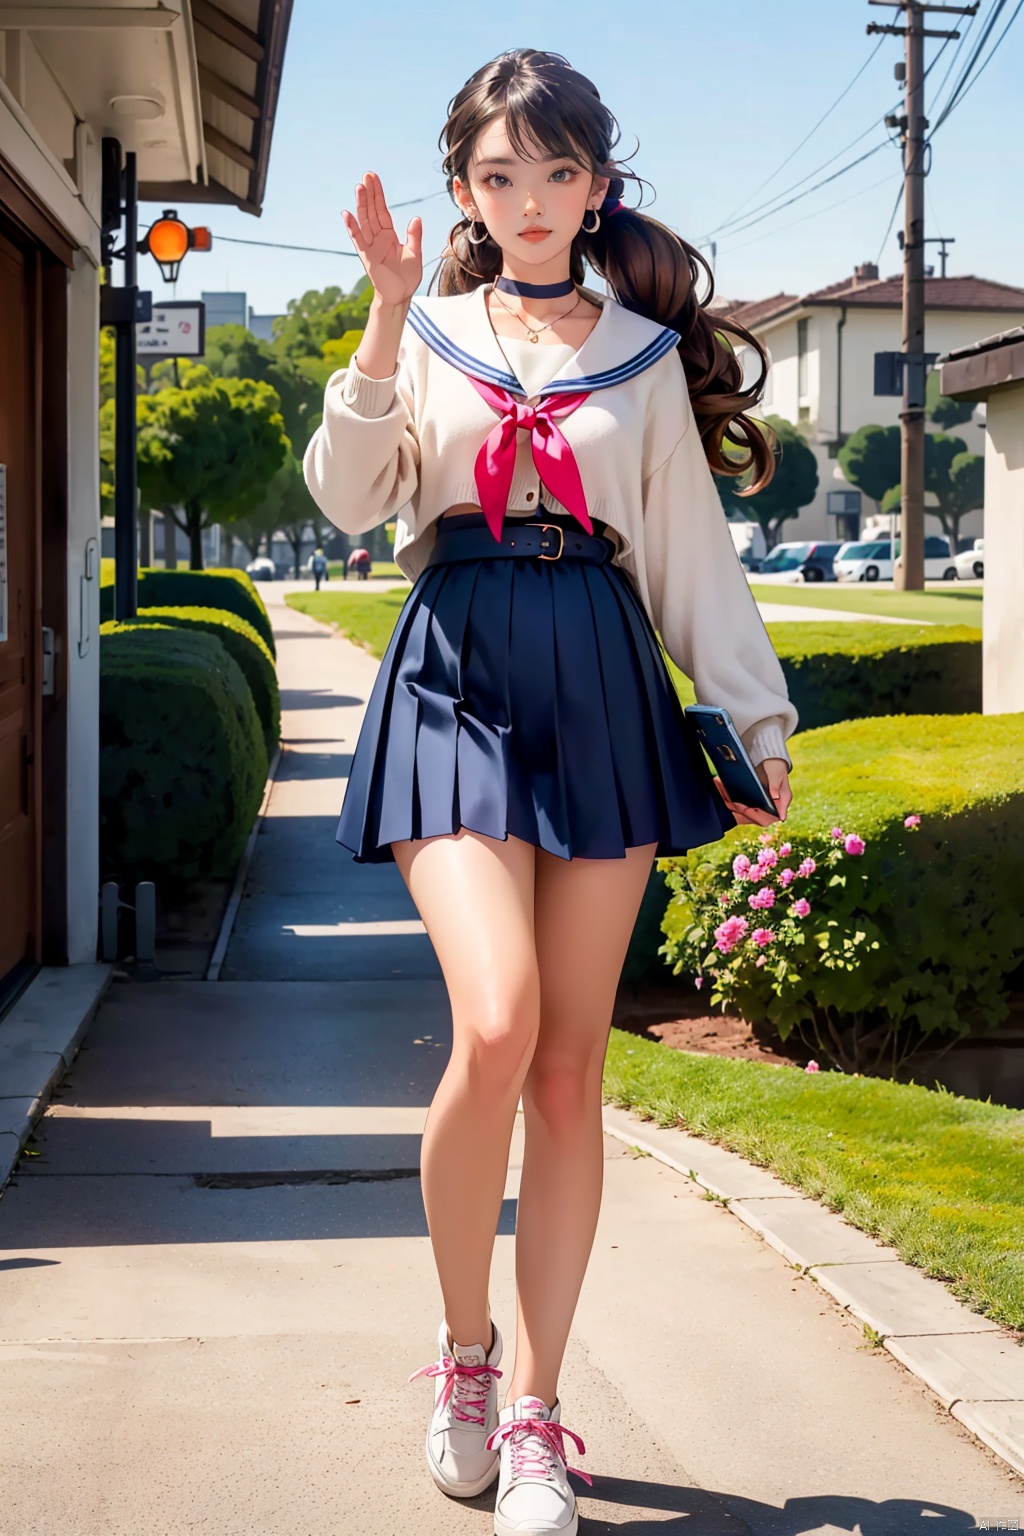 1girl, (sexy high school girl with a youthful and energetic vibe), ((full body)), (set against a backdrop of a bustling school corridor or vibrant cityscape outside the school gates), (wearing a form-fitting Japanese school uniform - a sailor-style blouse in crisp white with a deep blue or scarlet collar and matching pleated skirt that subtly emphasizes her curves while maintaining a playful innocence), (blouse neatly tucked into the skirt with a slender belt or ribbon around the waist), (stockings in contrasting colors or patterns, paired with cute Mary Jane shoes or fashionable sneakers), (shoulder-length hair styled in loose waves or twin-tails, featuring highlights or streaks to reflect her personal flair), (bright, expressive [hazel, brown, or sparkling] eyes framed by long lashes and bangs swept to the side), (accessorized with trendy earrings, a simple necklace or choker, and possibly a few colorful hairpins), (carrying a backpack slung over one shoulder, textbooks or a manga book peeking out from the top), (one hand holding a smartphone or waving to friends nearby), (posture exuding confidence and a hint of rebelliousness), (a slight breeze lifting the hem of her skirt and fluttering through her hair, capturing movement), (dressed for a mild season, wearing a lightweight cardigan or sweater tied around her shoulders, or a cropped jacket), (an air of cheerfulness and determination, representing the spirit of youth and academic life), (a soft blush on her cheeks and a warm smile on her lips).., ((poakl)), , (wide shot:0.95), (Dynamic pose:1.4),